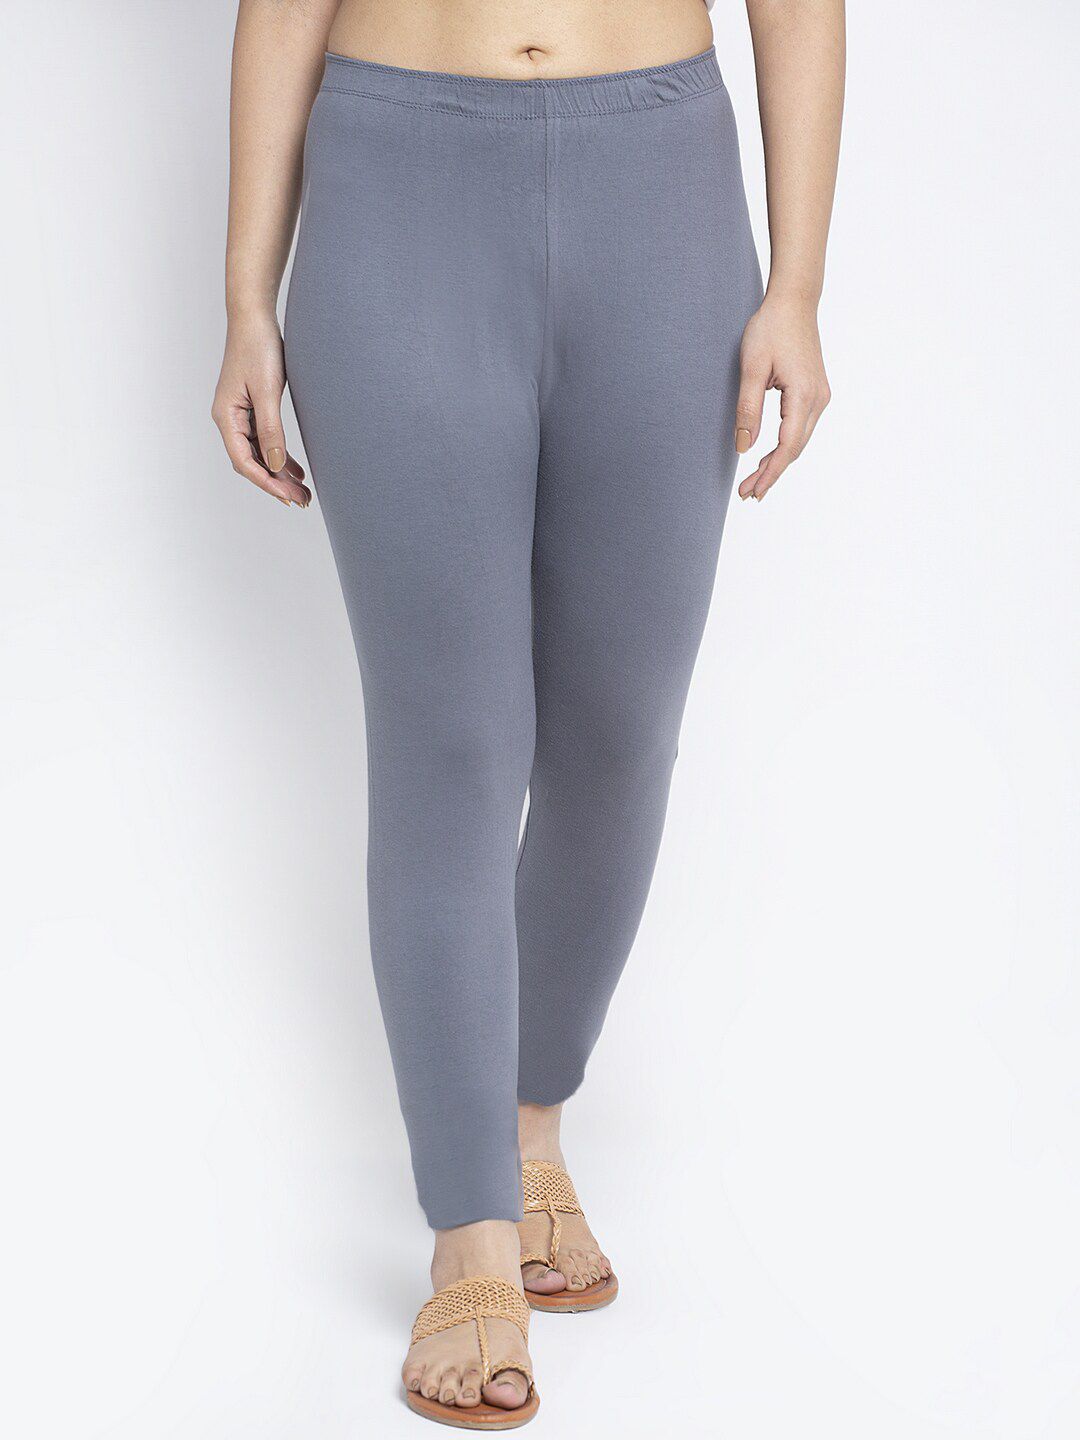 GRACIT Women Grey Solid Ankle-Length Leggings Price in India